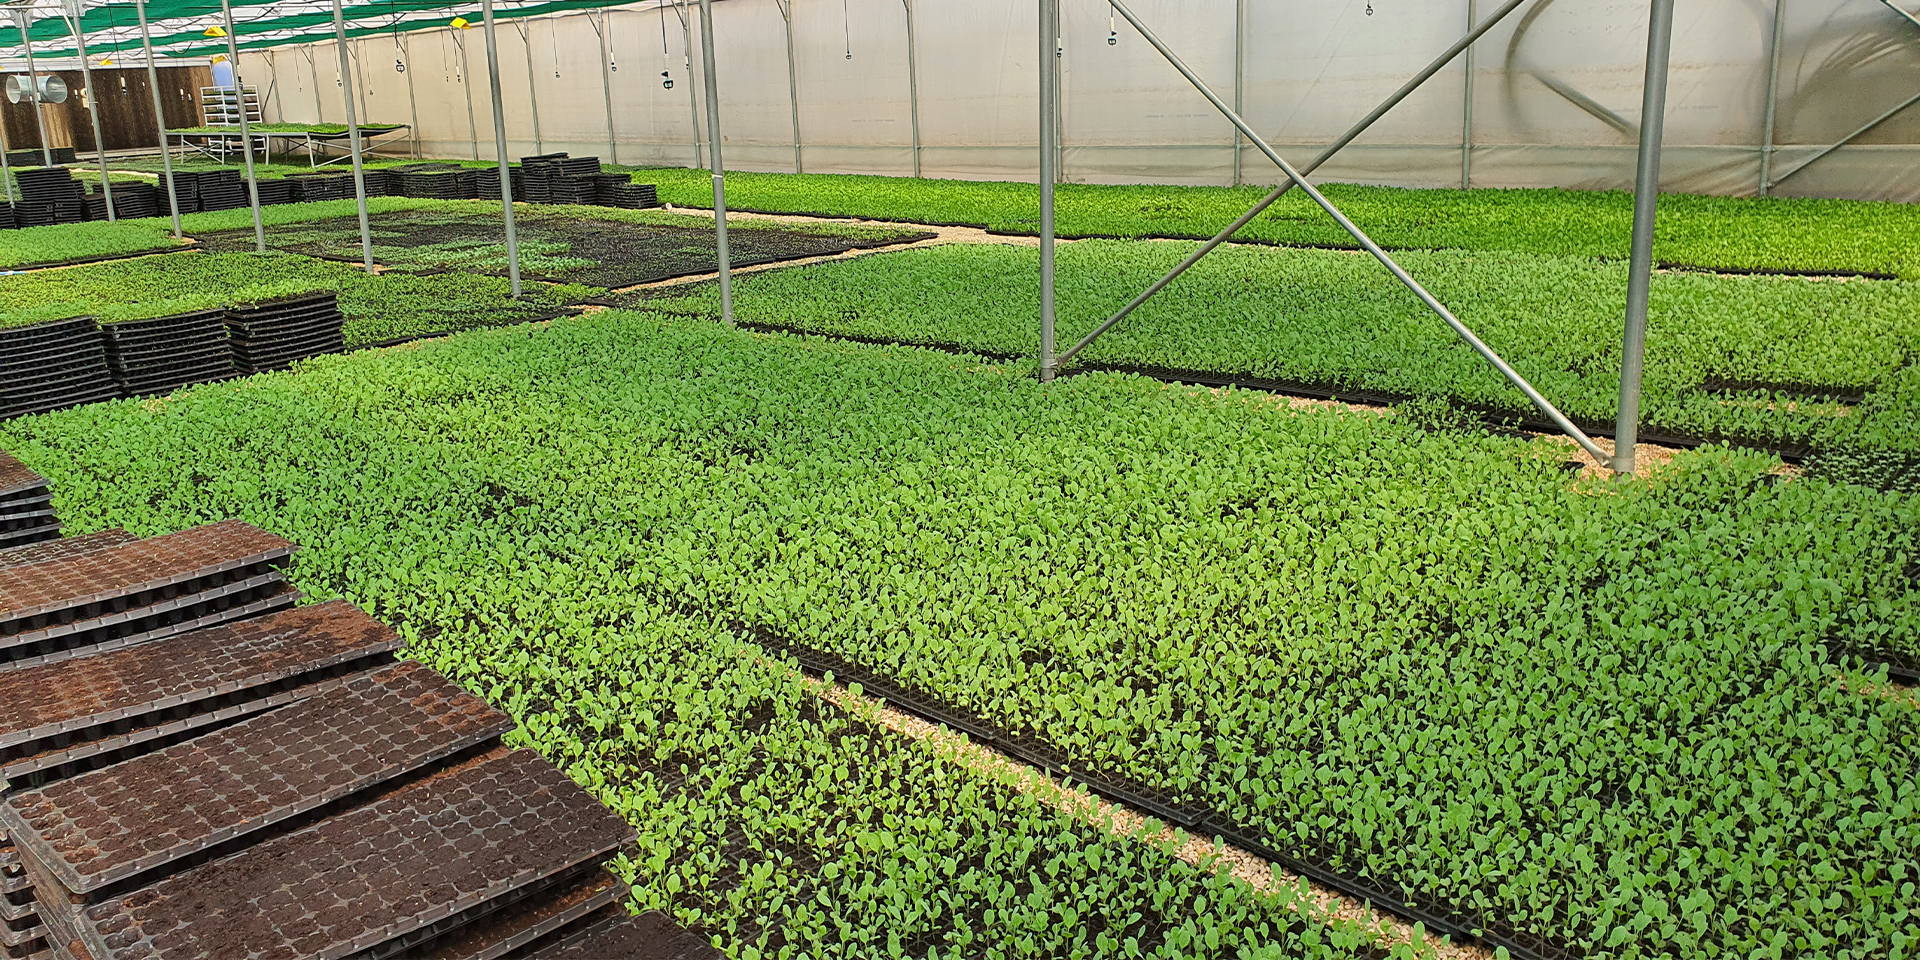 The interior of a greenhouse filled with sprouting crops.